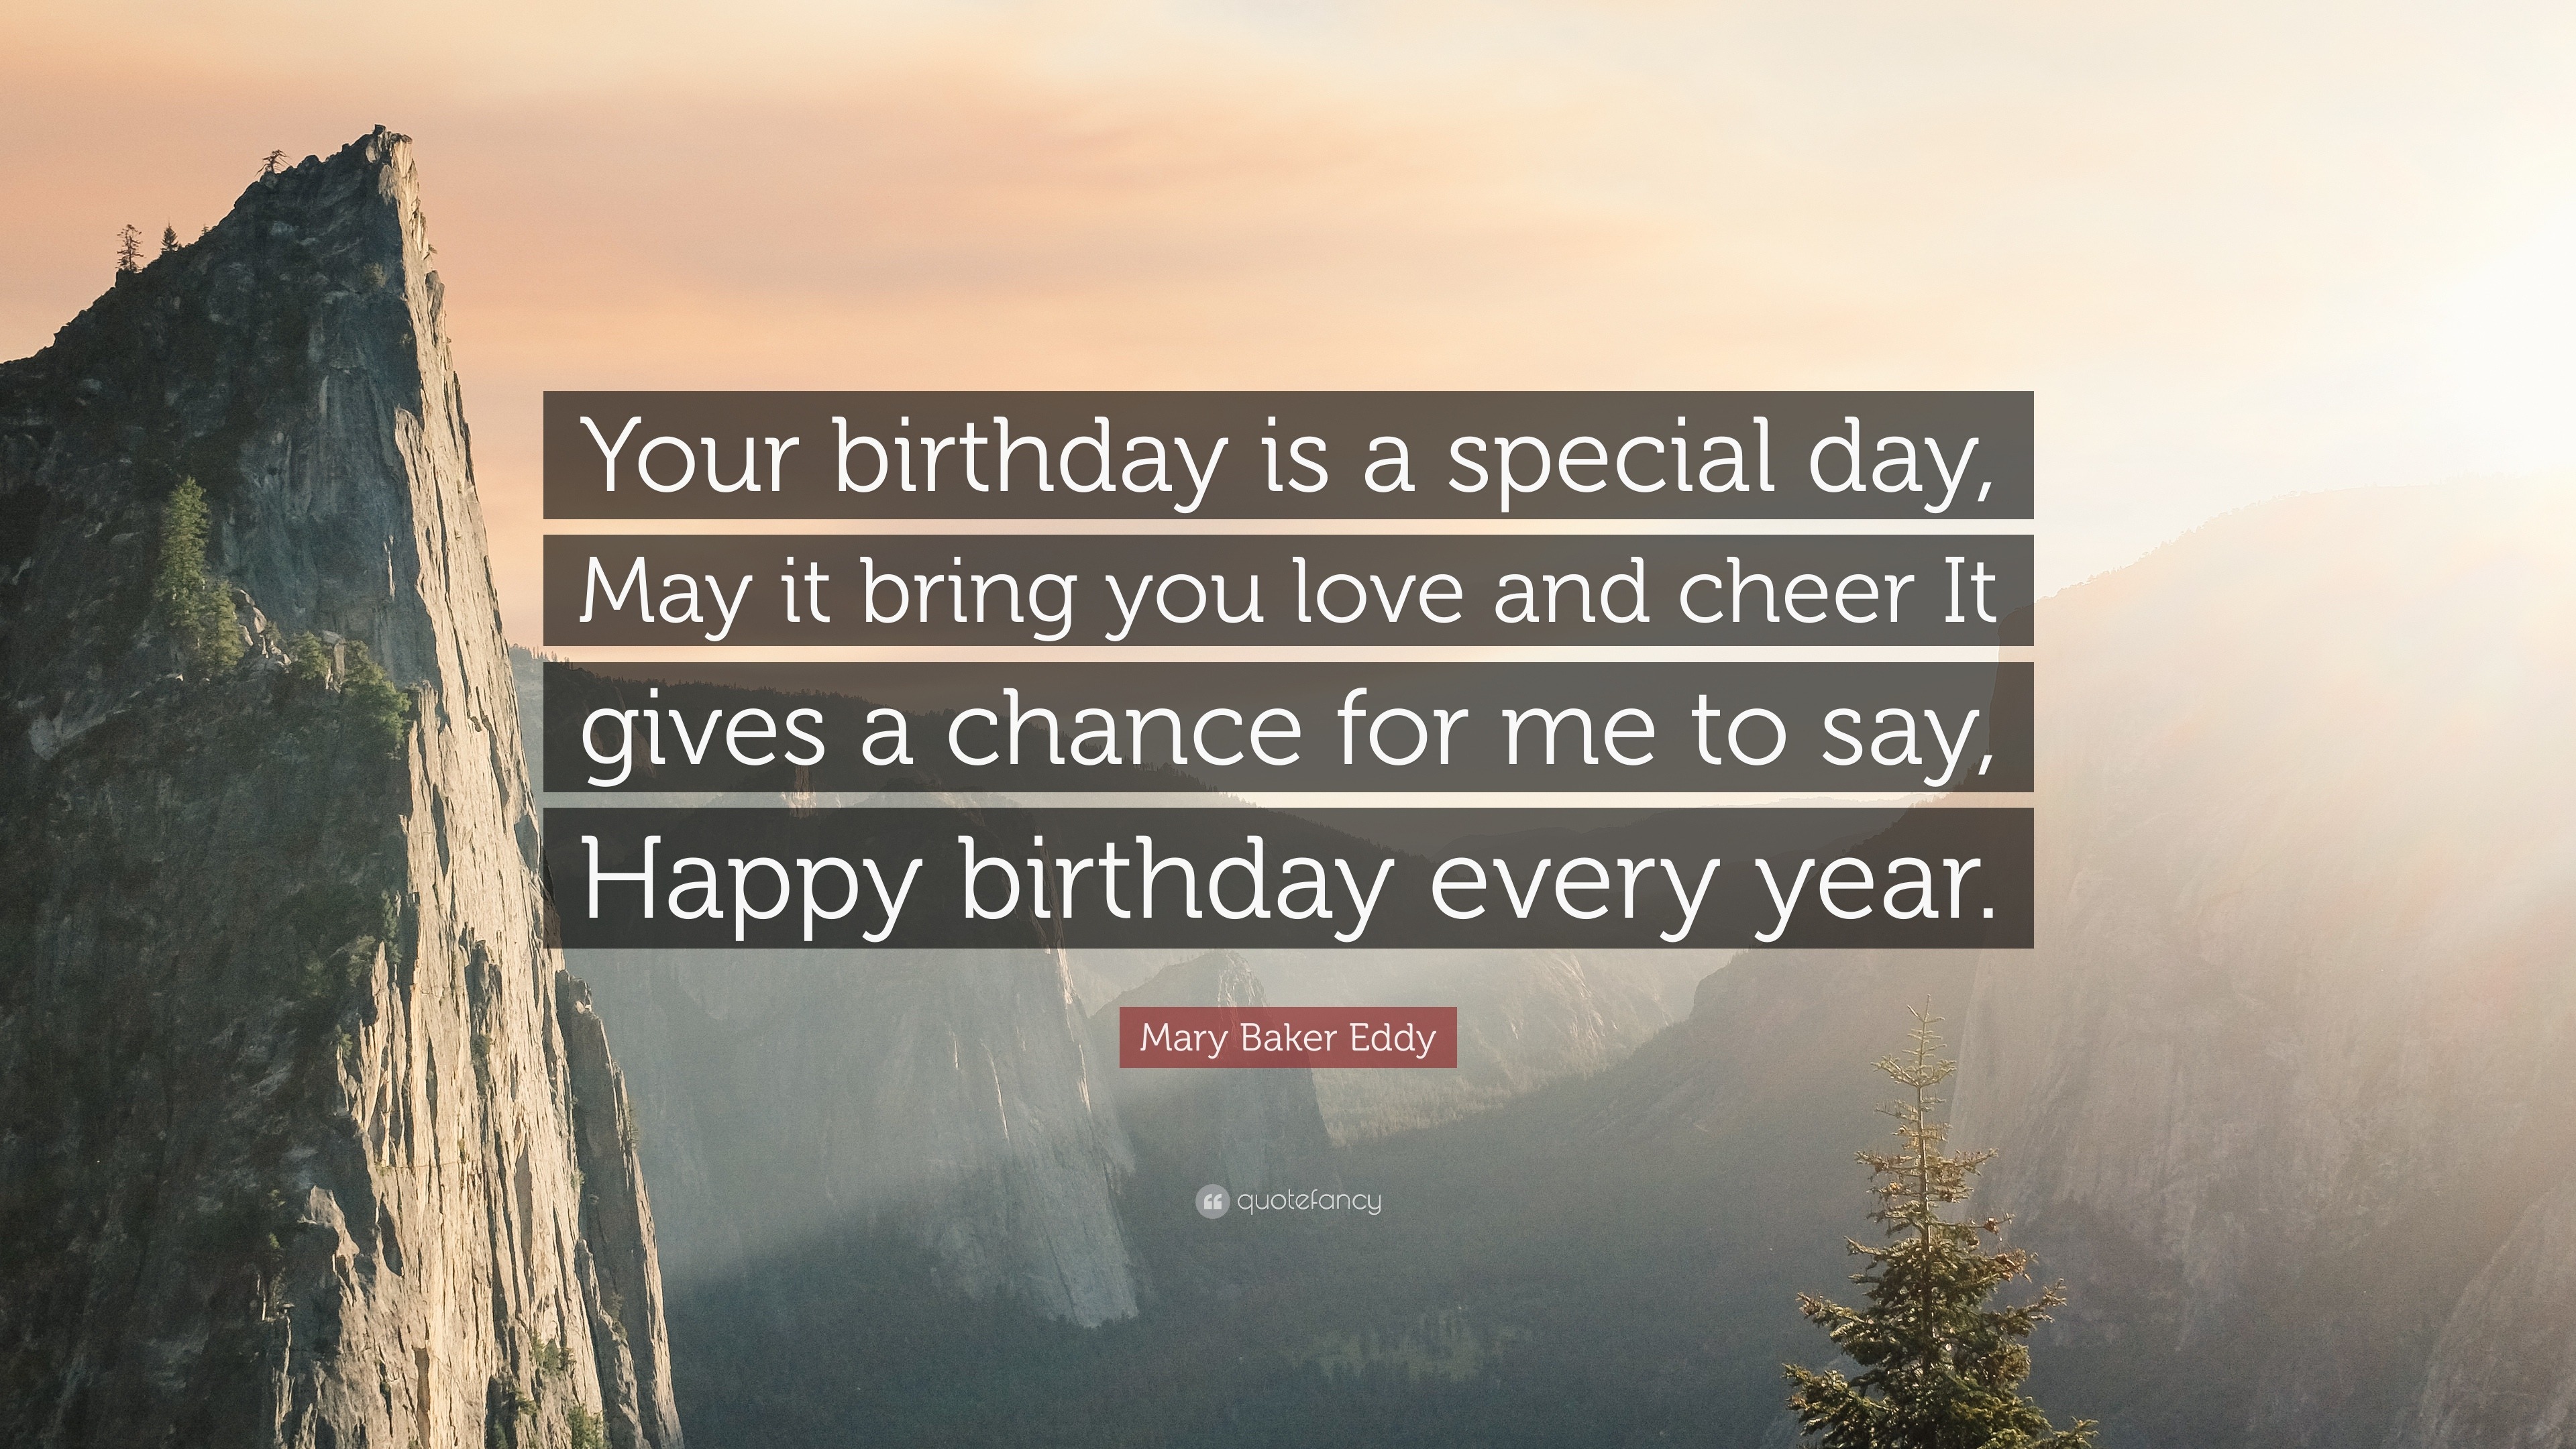 Mary Baker Eddy Quote Your Birthday Is A Special Day May It Bring You Love And Cheer It Gives A Chance For Me To Say Happy Birthday Every Ye